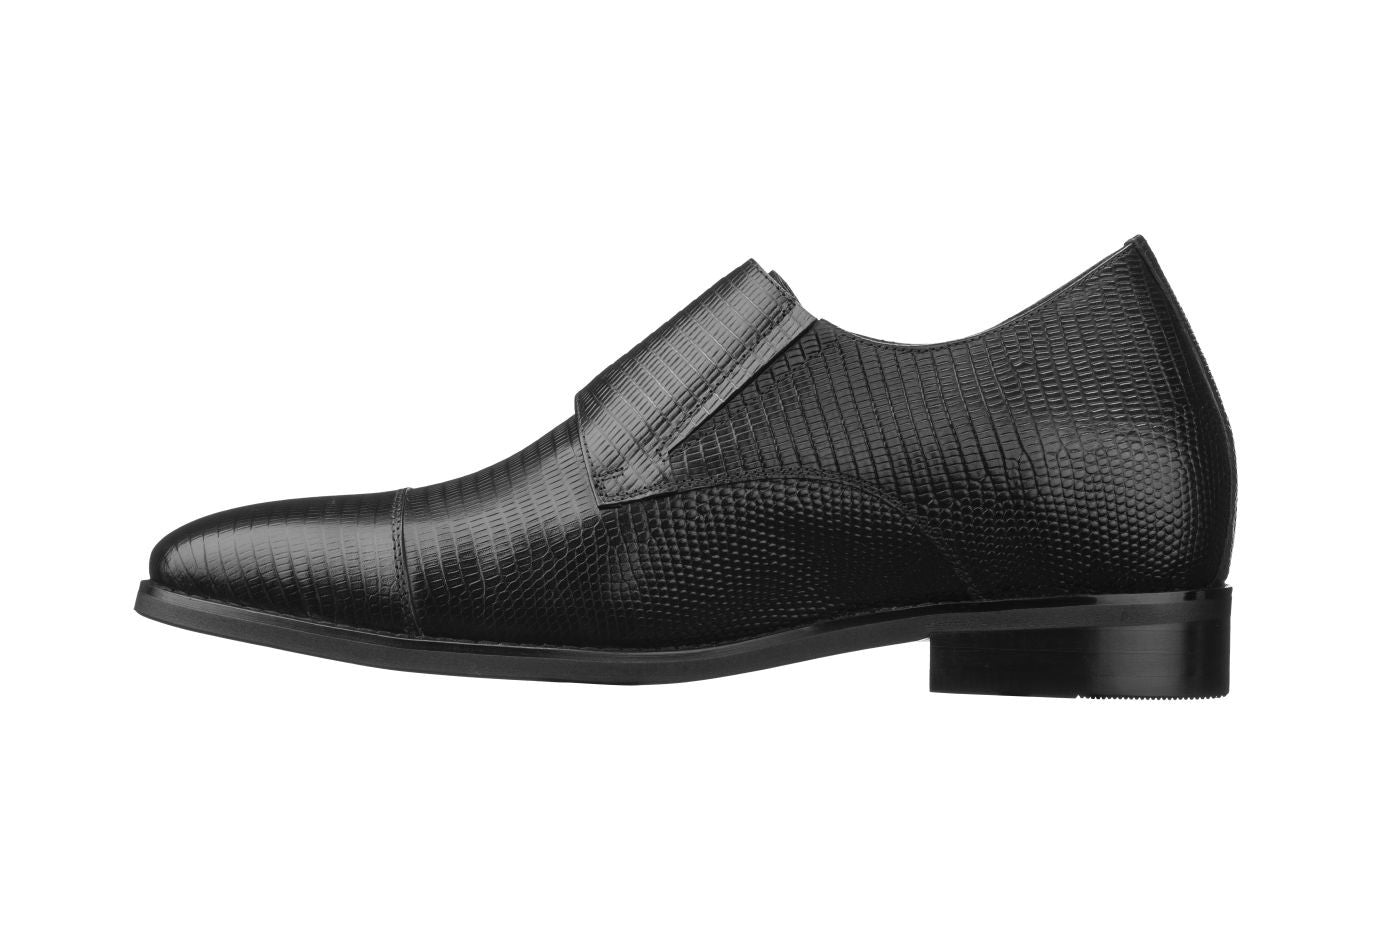 Elevator shoes height increase CALTO - K3114 - 2.8 Inches Taller (Black) - Dual Monk Strap